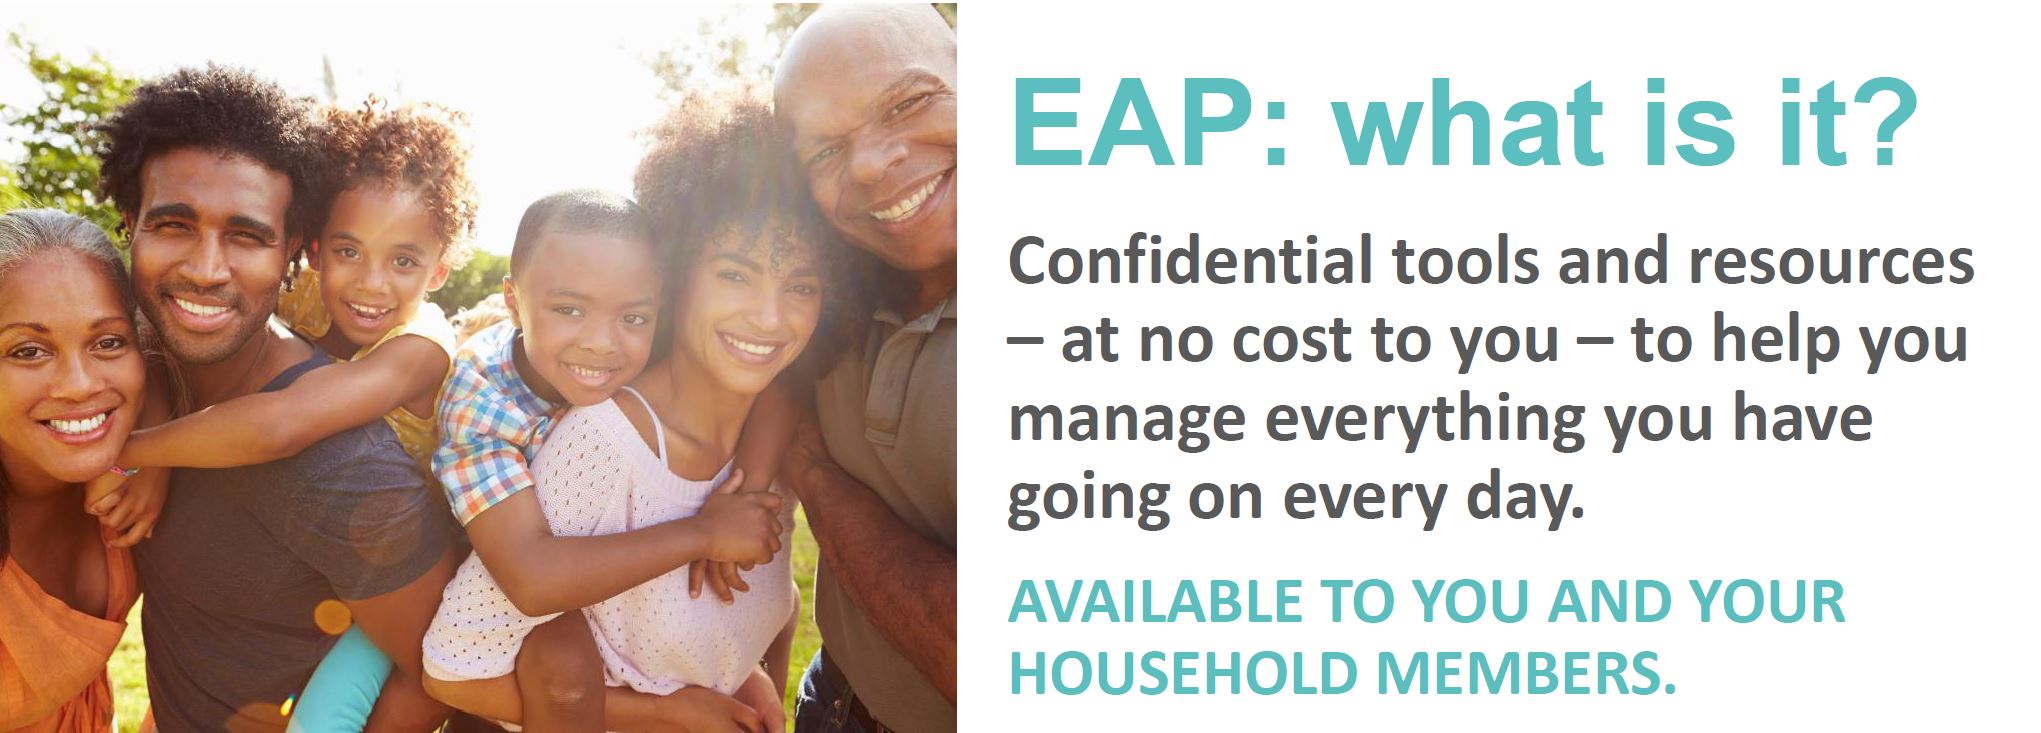 EAP: What is it? Confidential tools and resources – at no cost to you – to help you manage everything you have going on every da. Available to you and your household members.